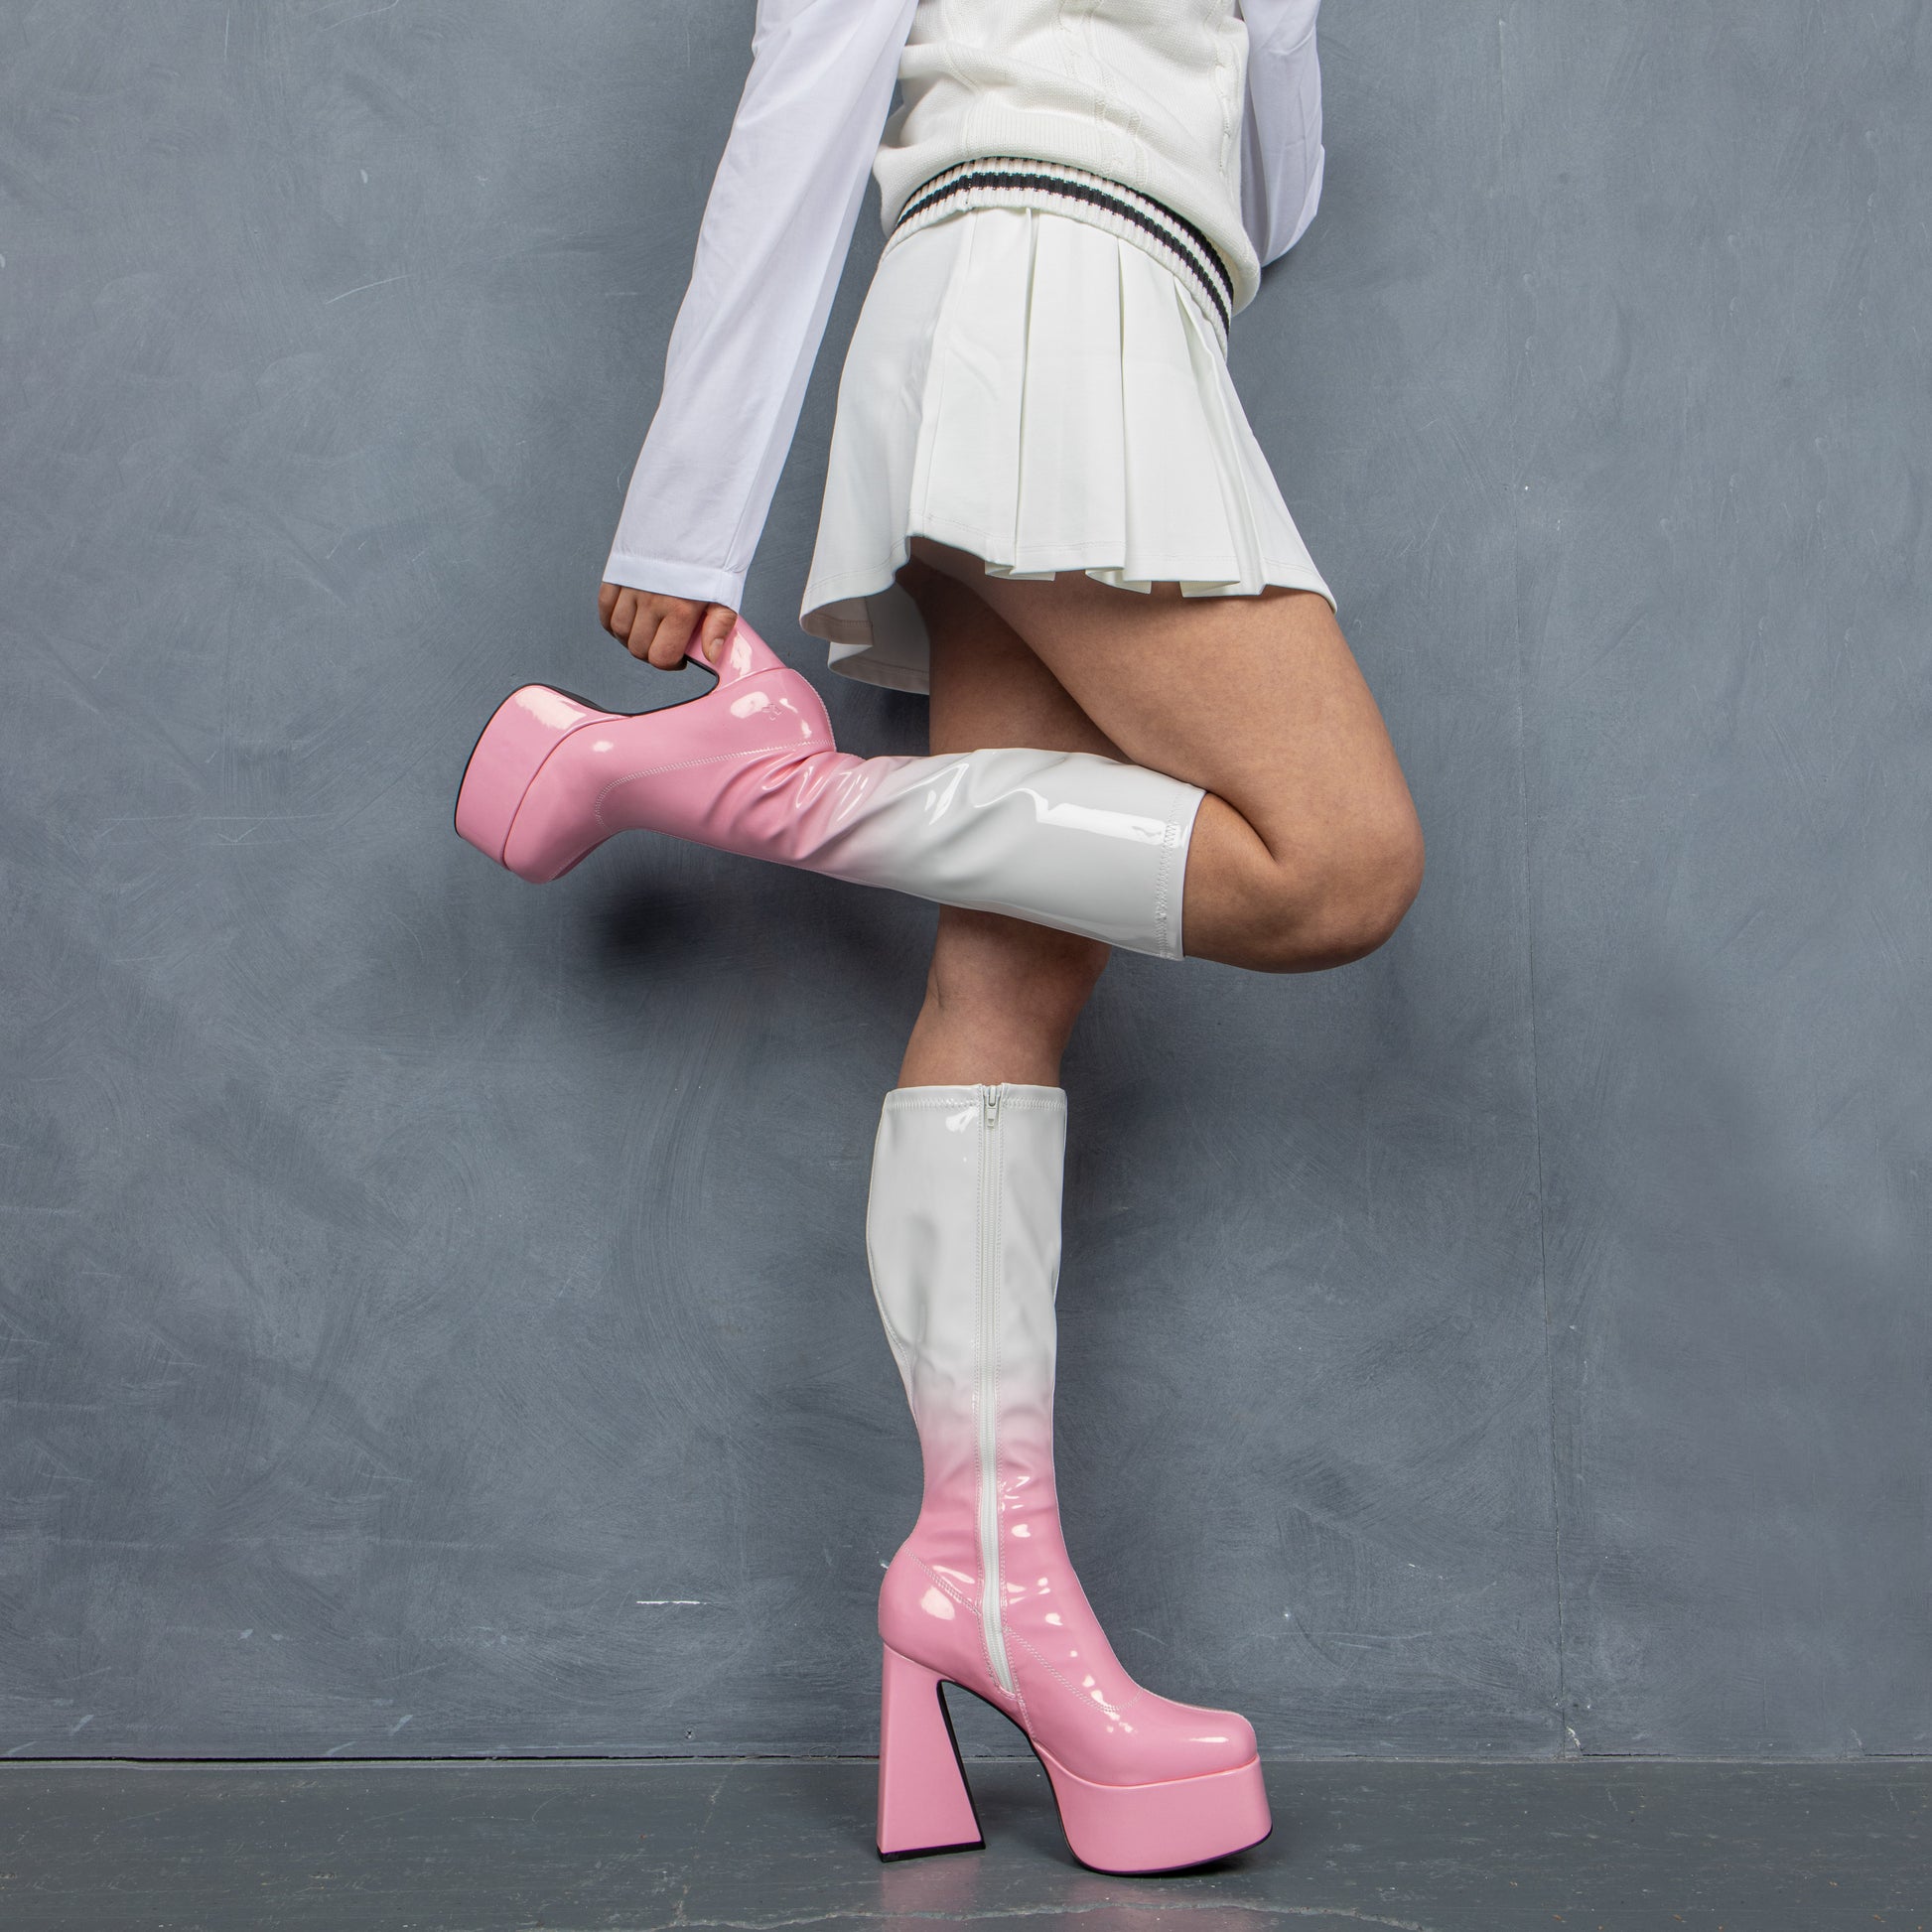 Raspberry Ripple Heeled Long Boots - Long Boots - KOI Footwear - Pink - Model Right View